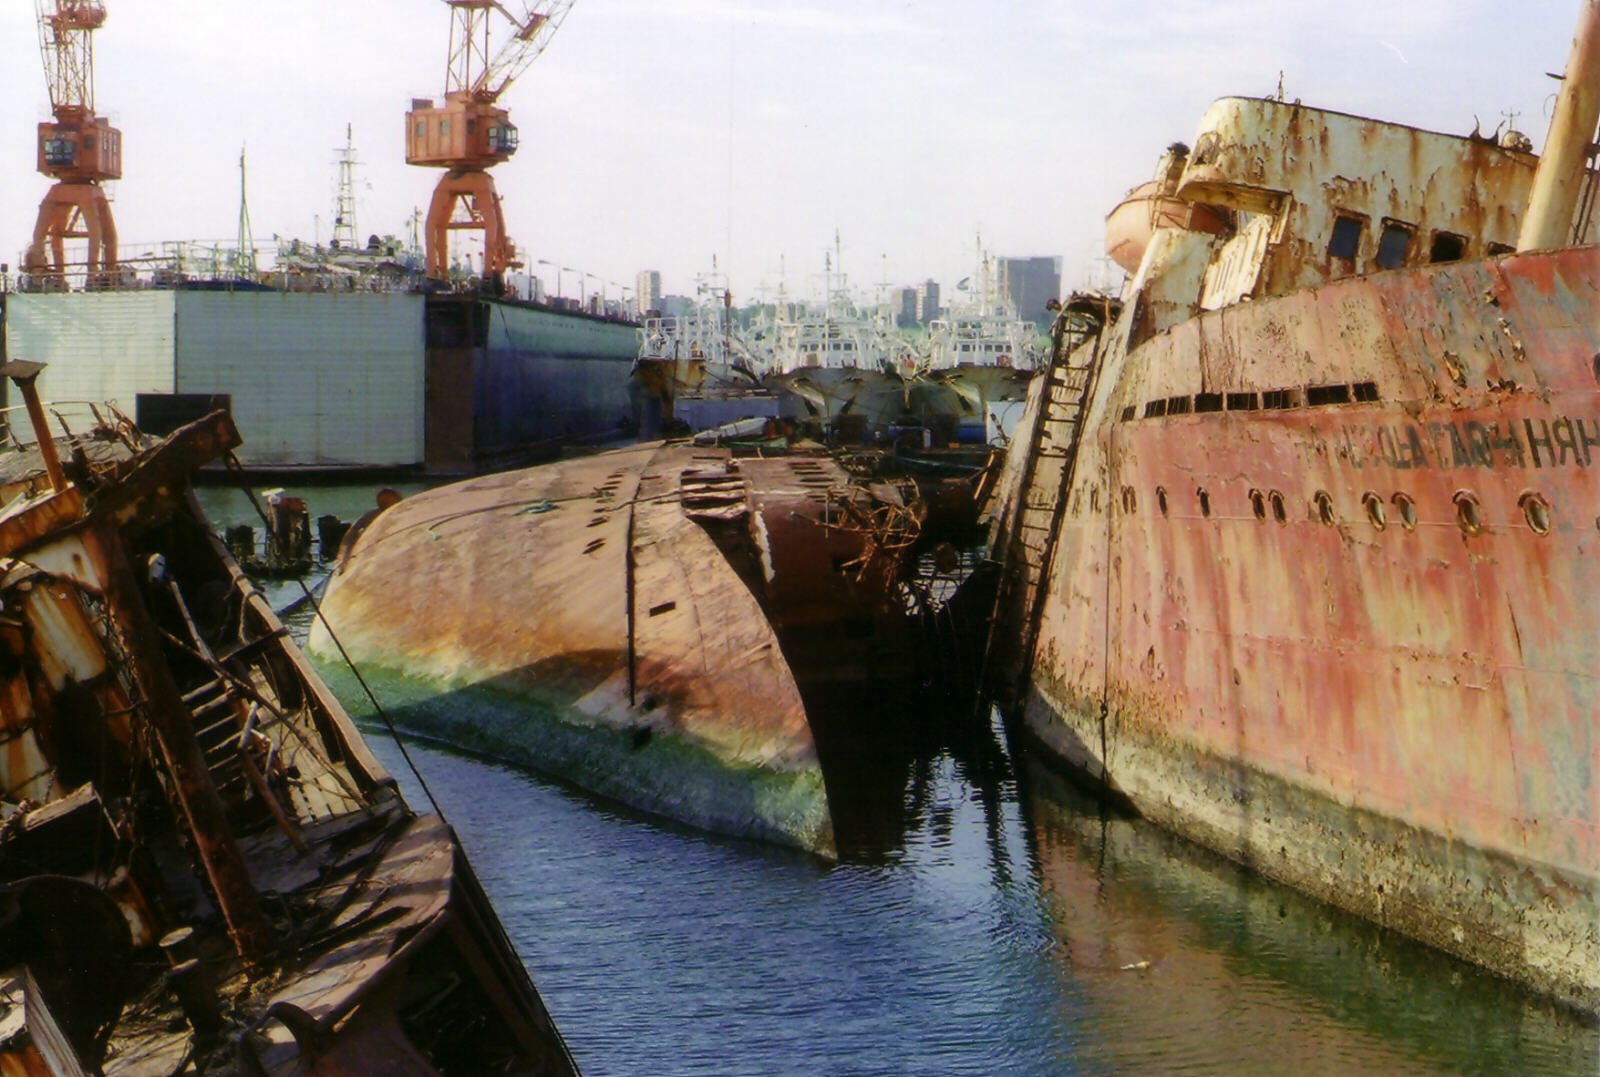 Ships rusting away in the port at Mar del Plata, Argentina